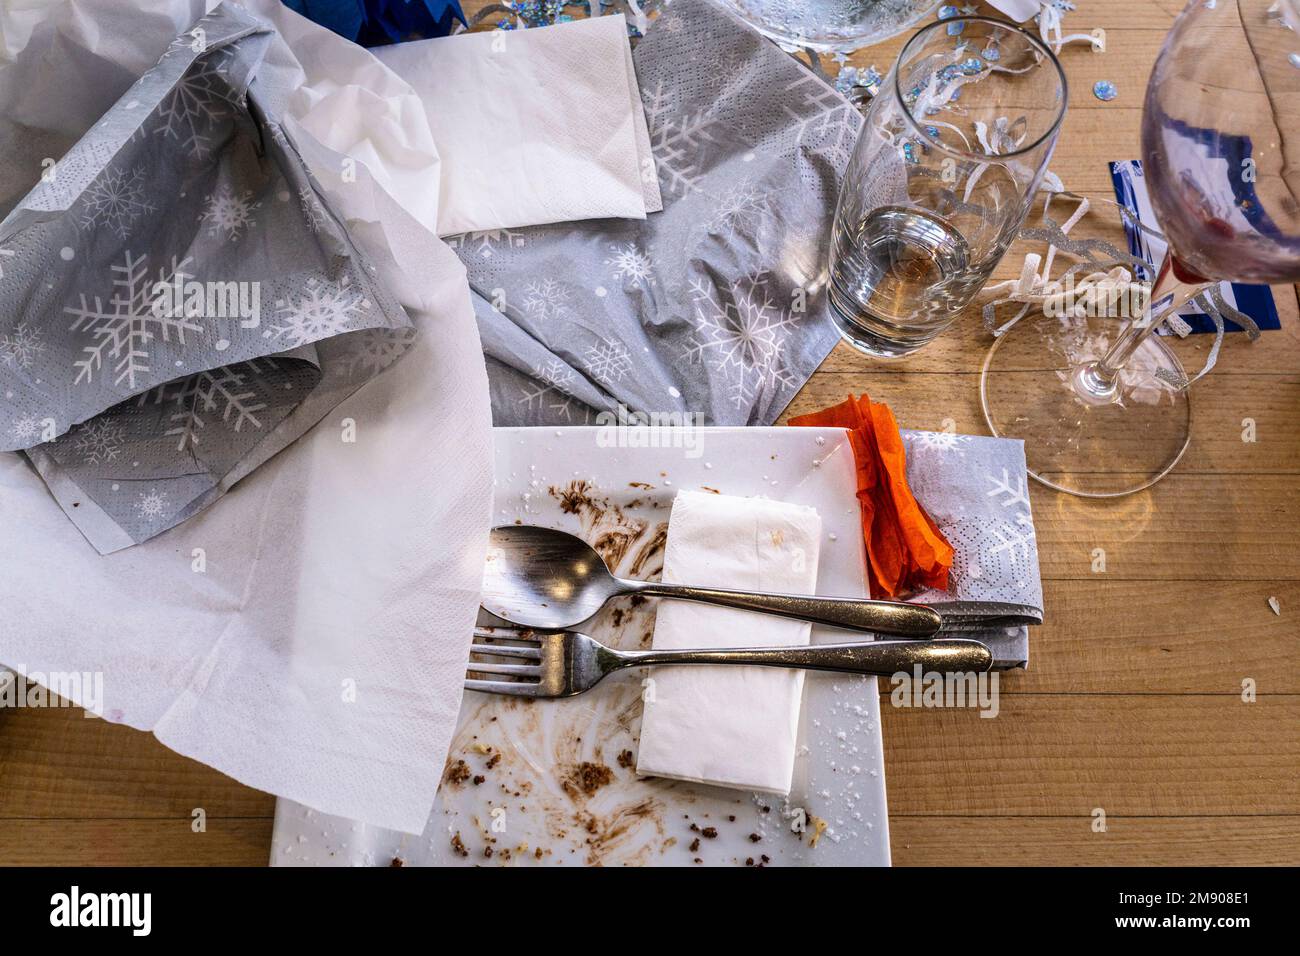 An overhead view of used dishes and glasses on a table after a Christmas meal in a restaurant. Stock Photo